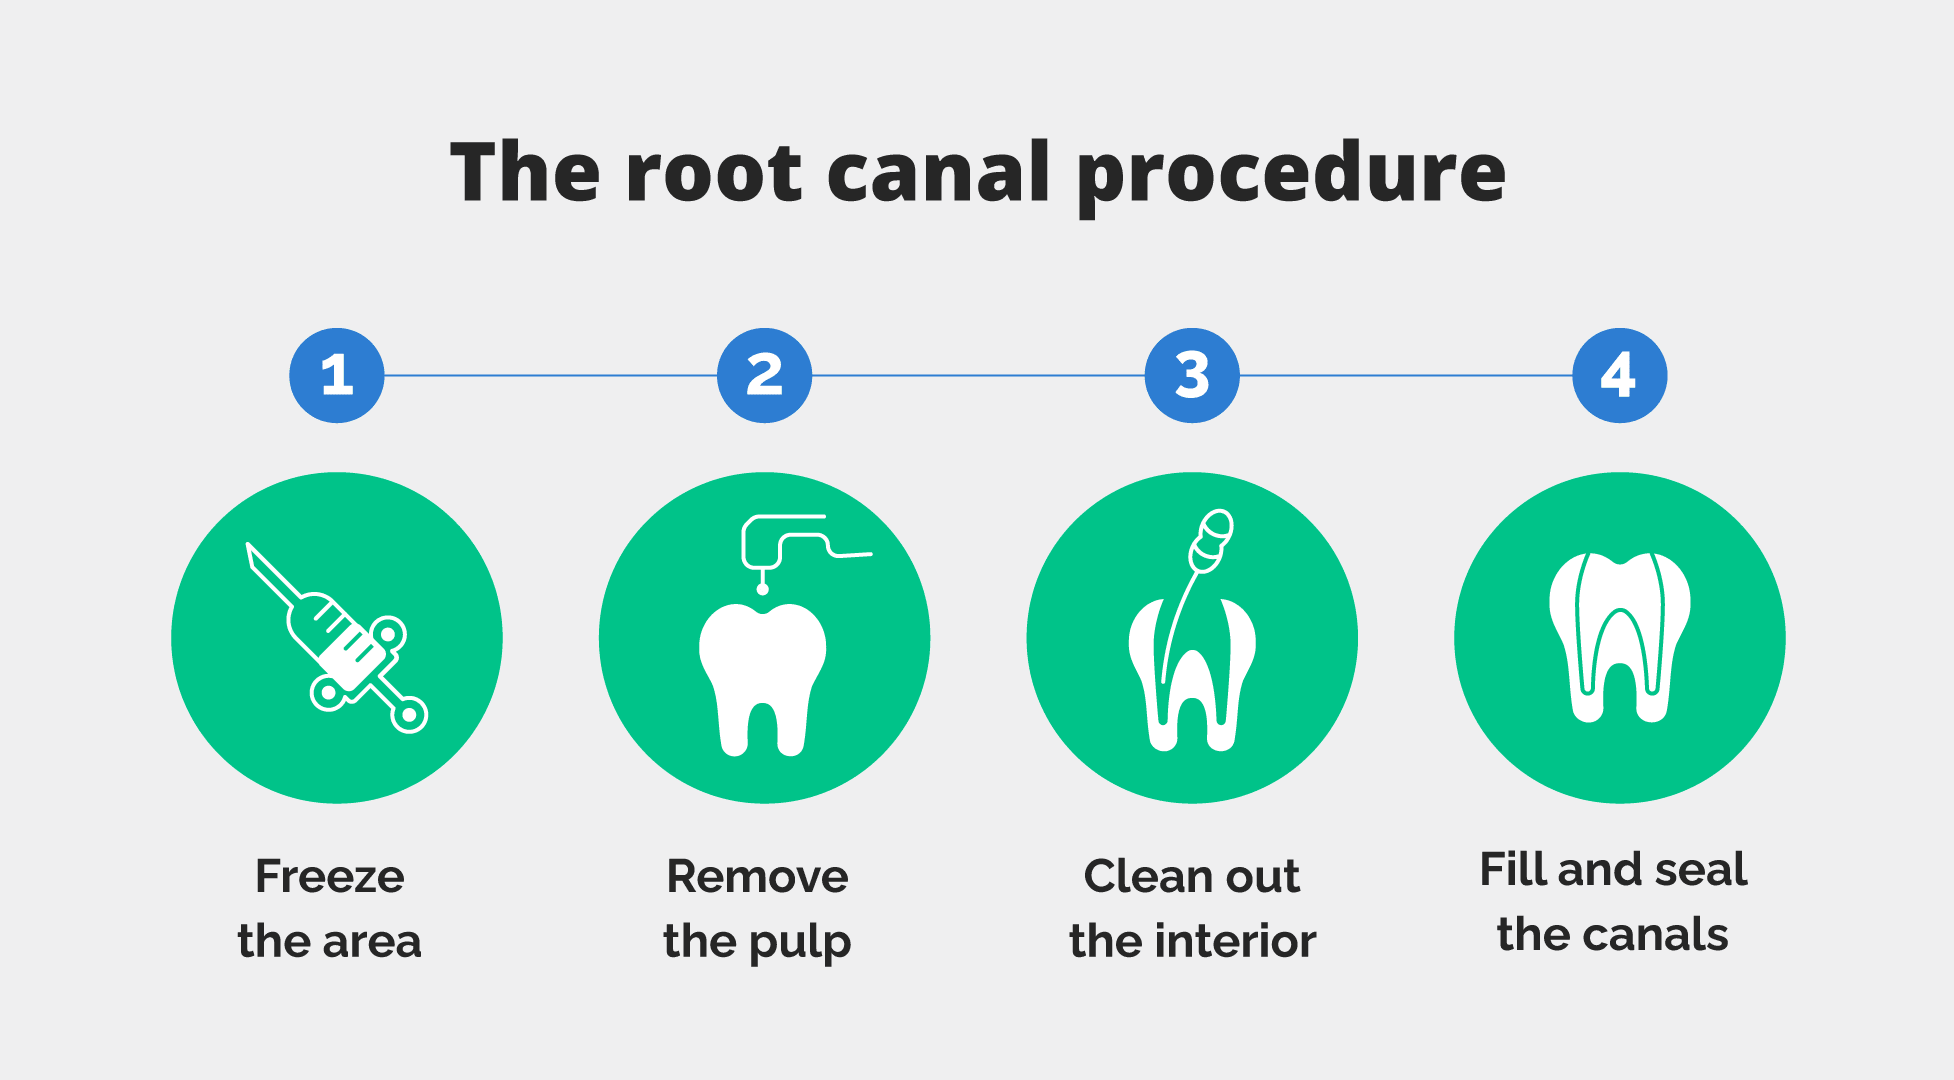 The root canal procedure steps